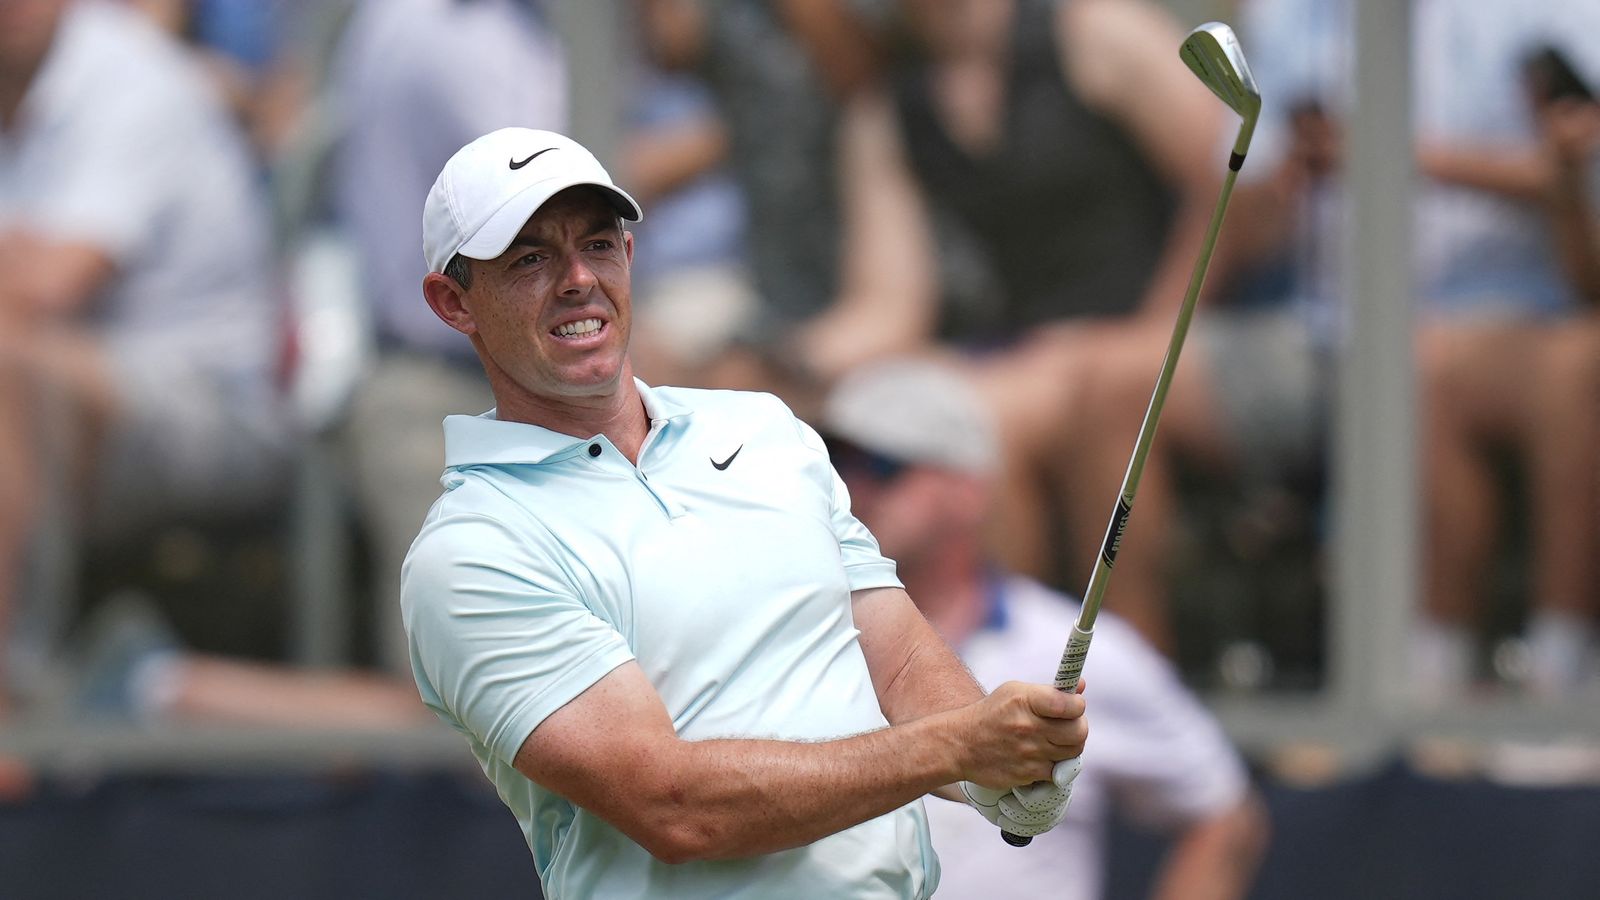 Rory McIlroy makes quick exit from US Open after losing out to Bryson DeChambeau 